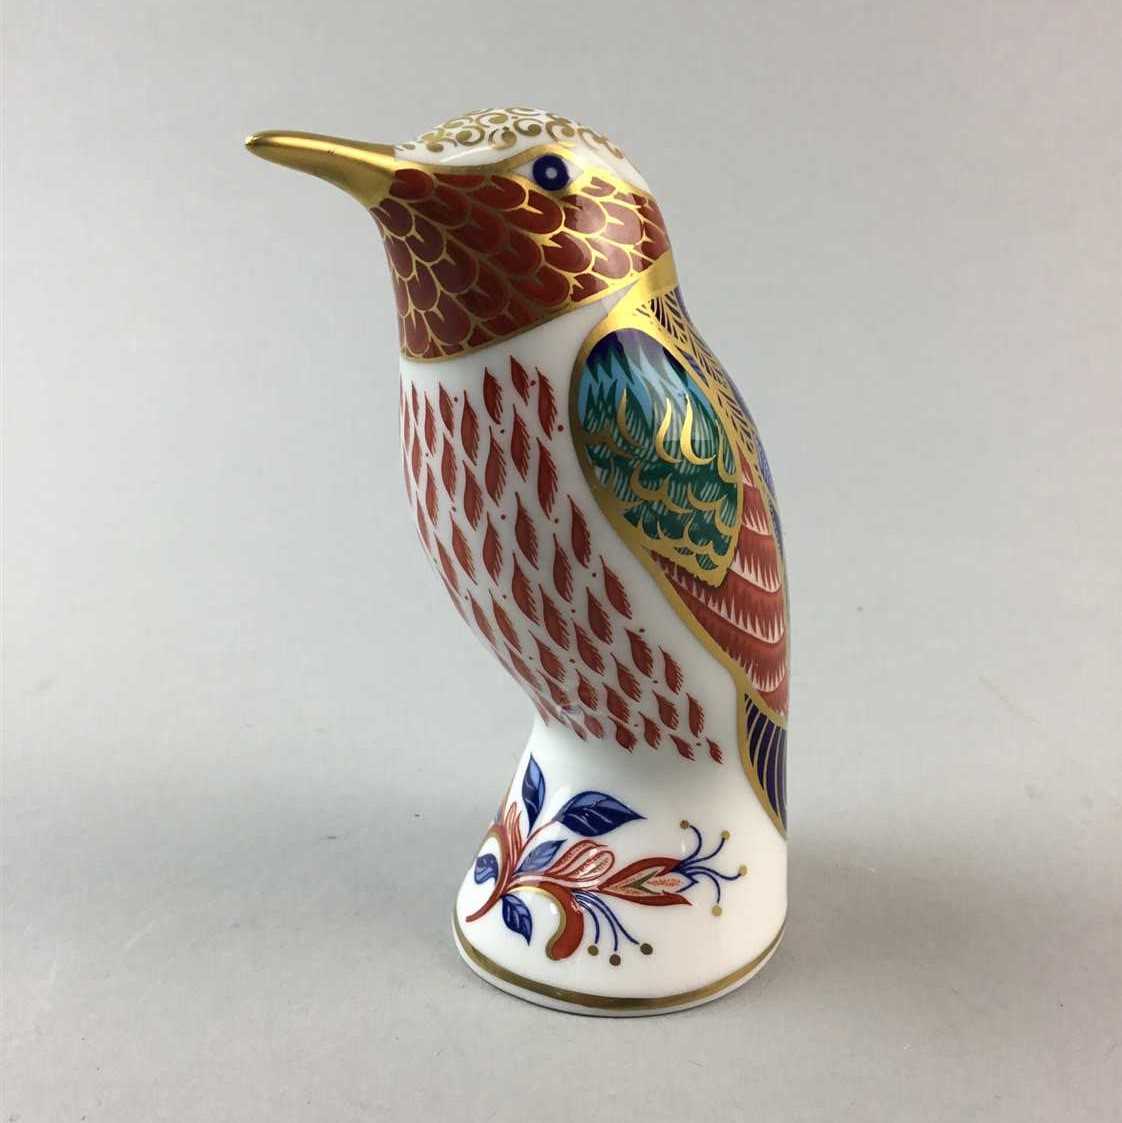 Lot 1 - A ROYAL CROWN DERBY PAPERWEIGHT IN THE FORM OF A BIRD